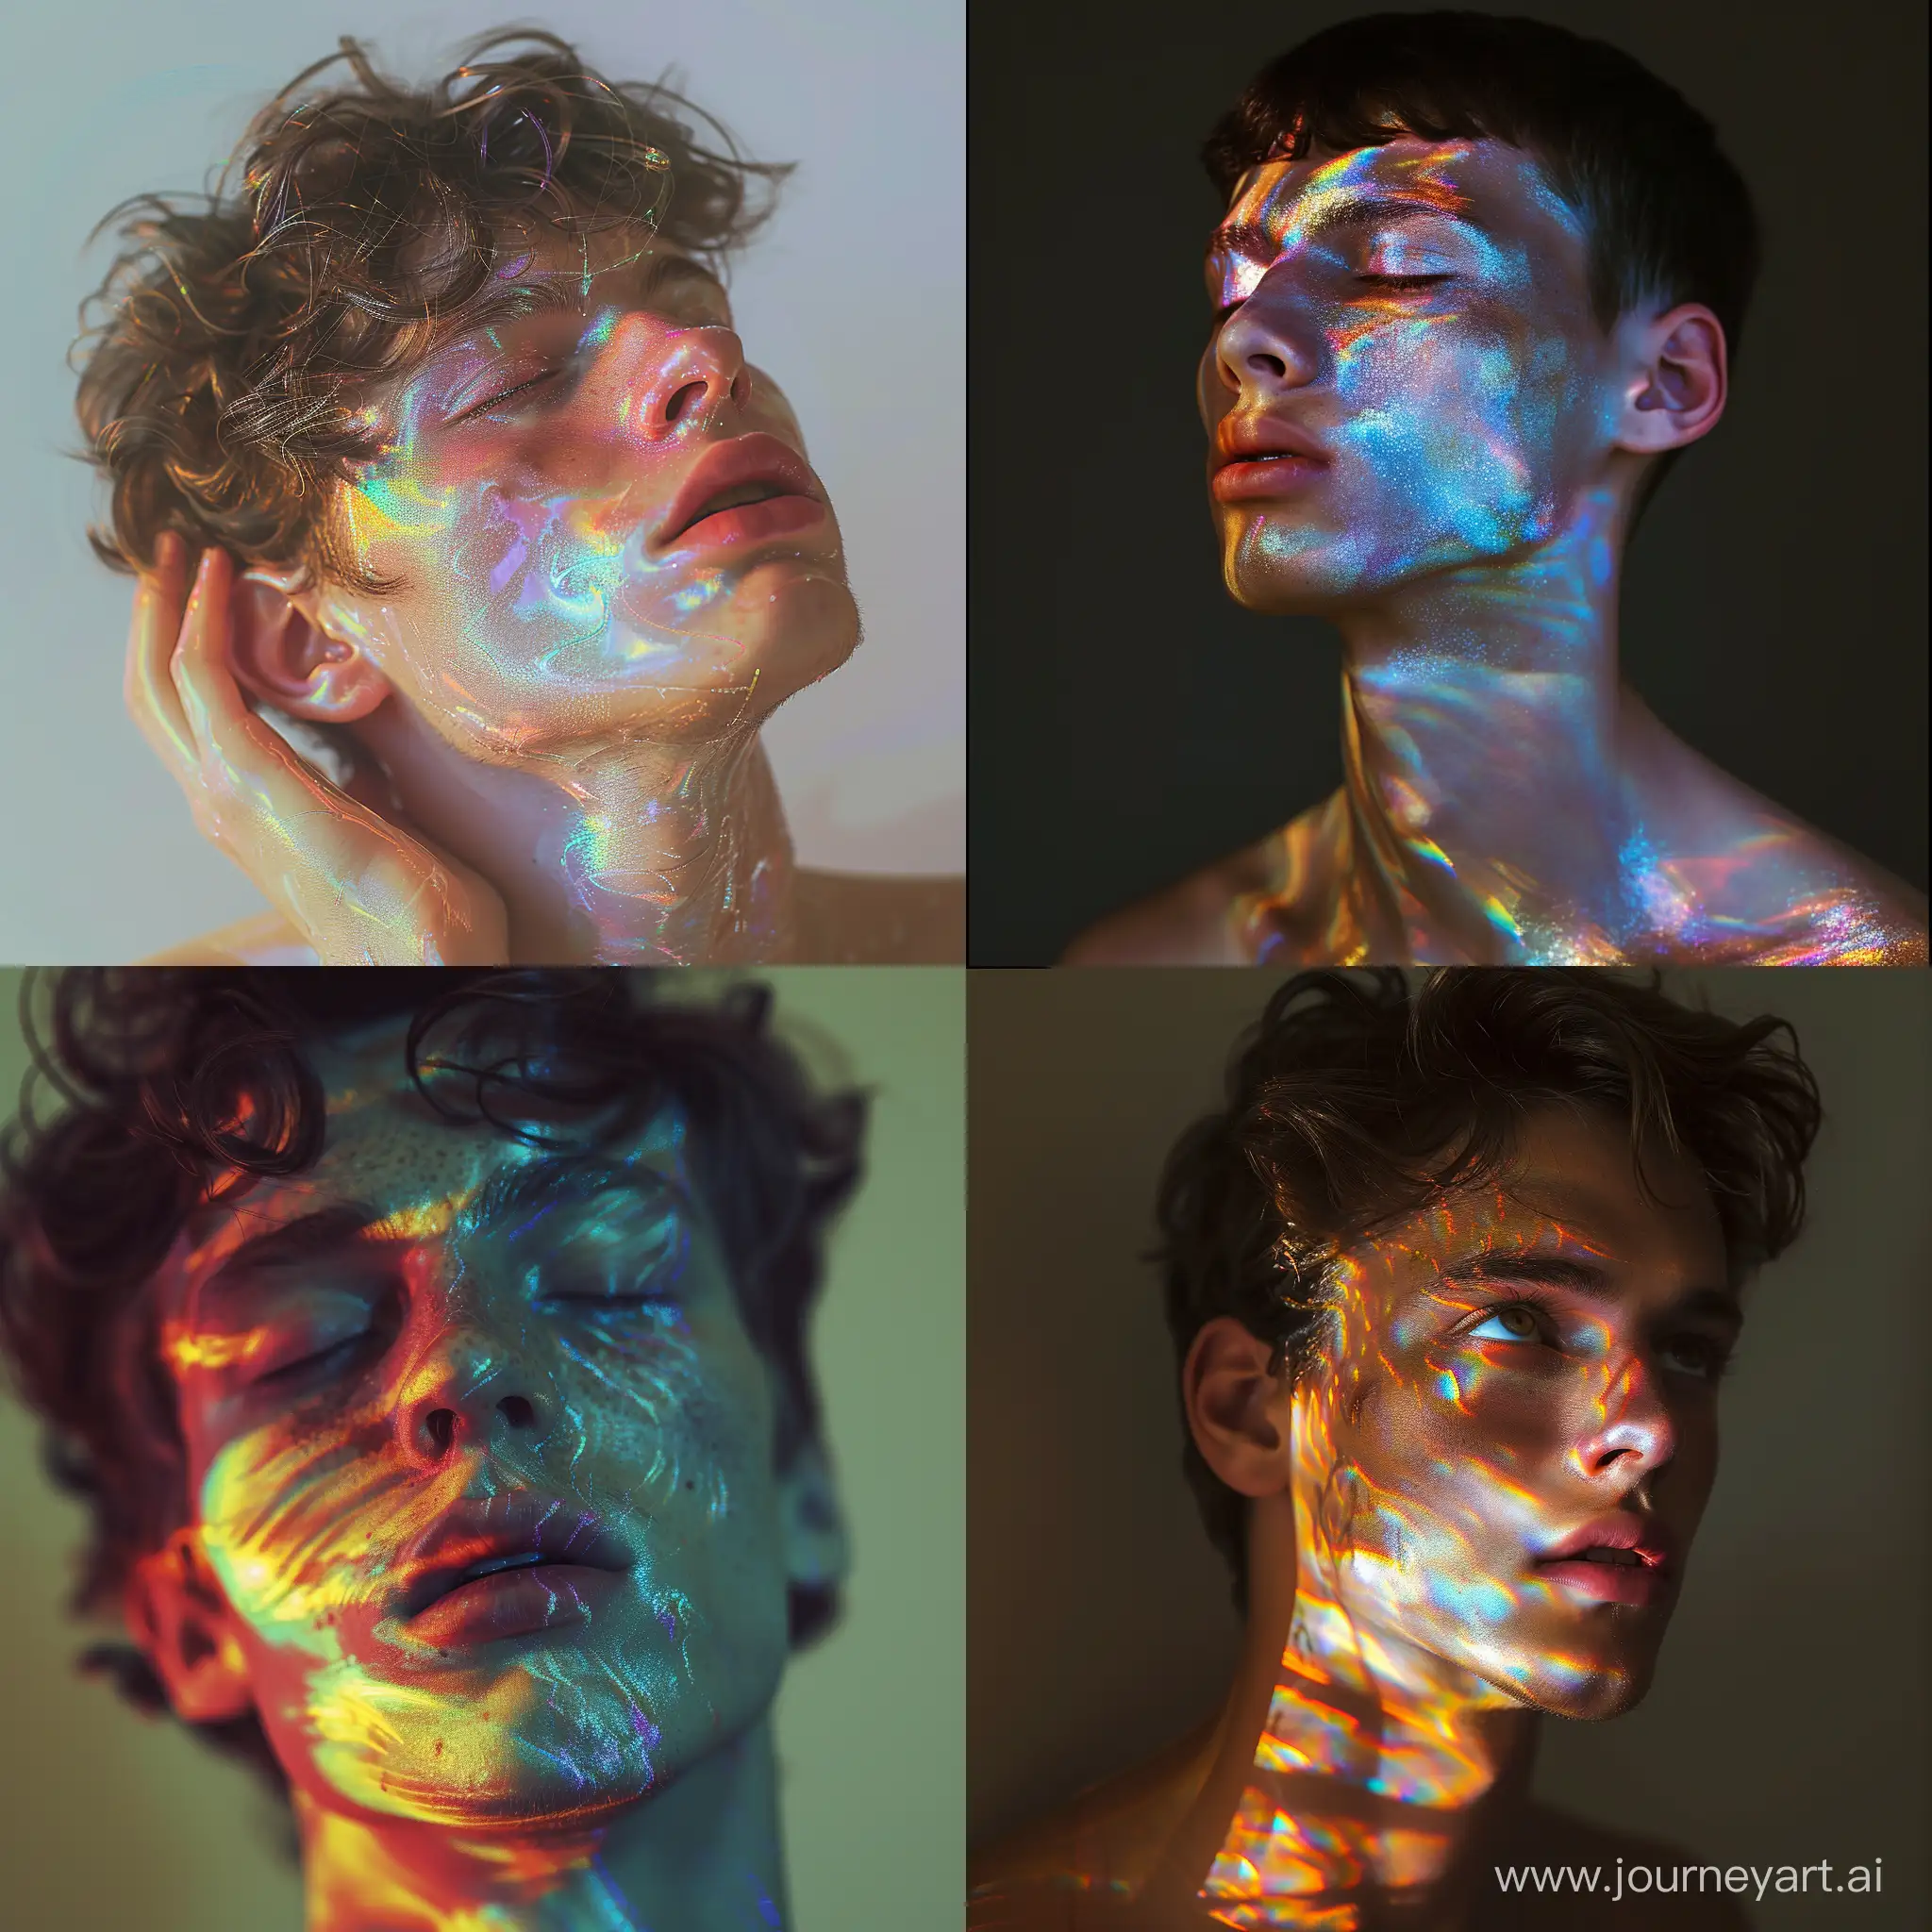 Hyperrealistic-Baroque-Style-Portrait-of-a-20YearOld-Man-with-Iridescent-Aesthetics